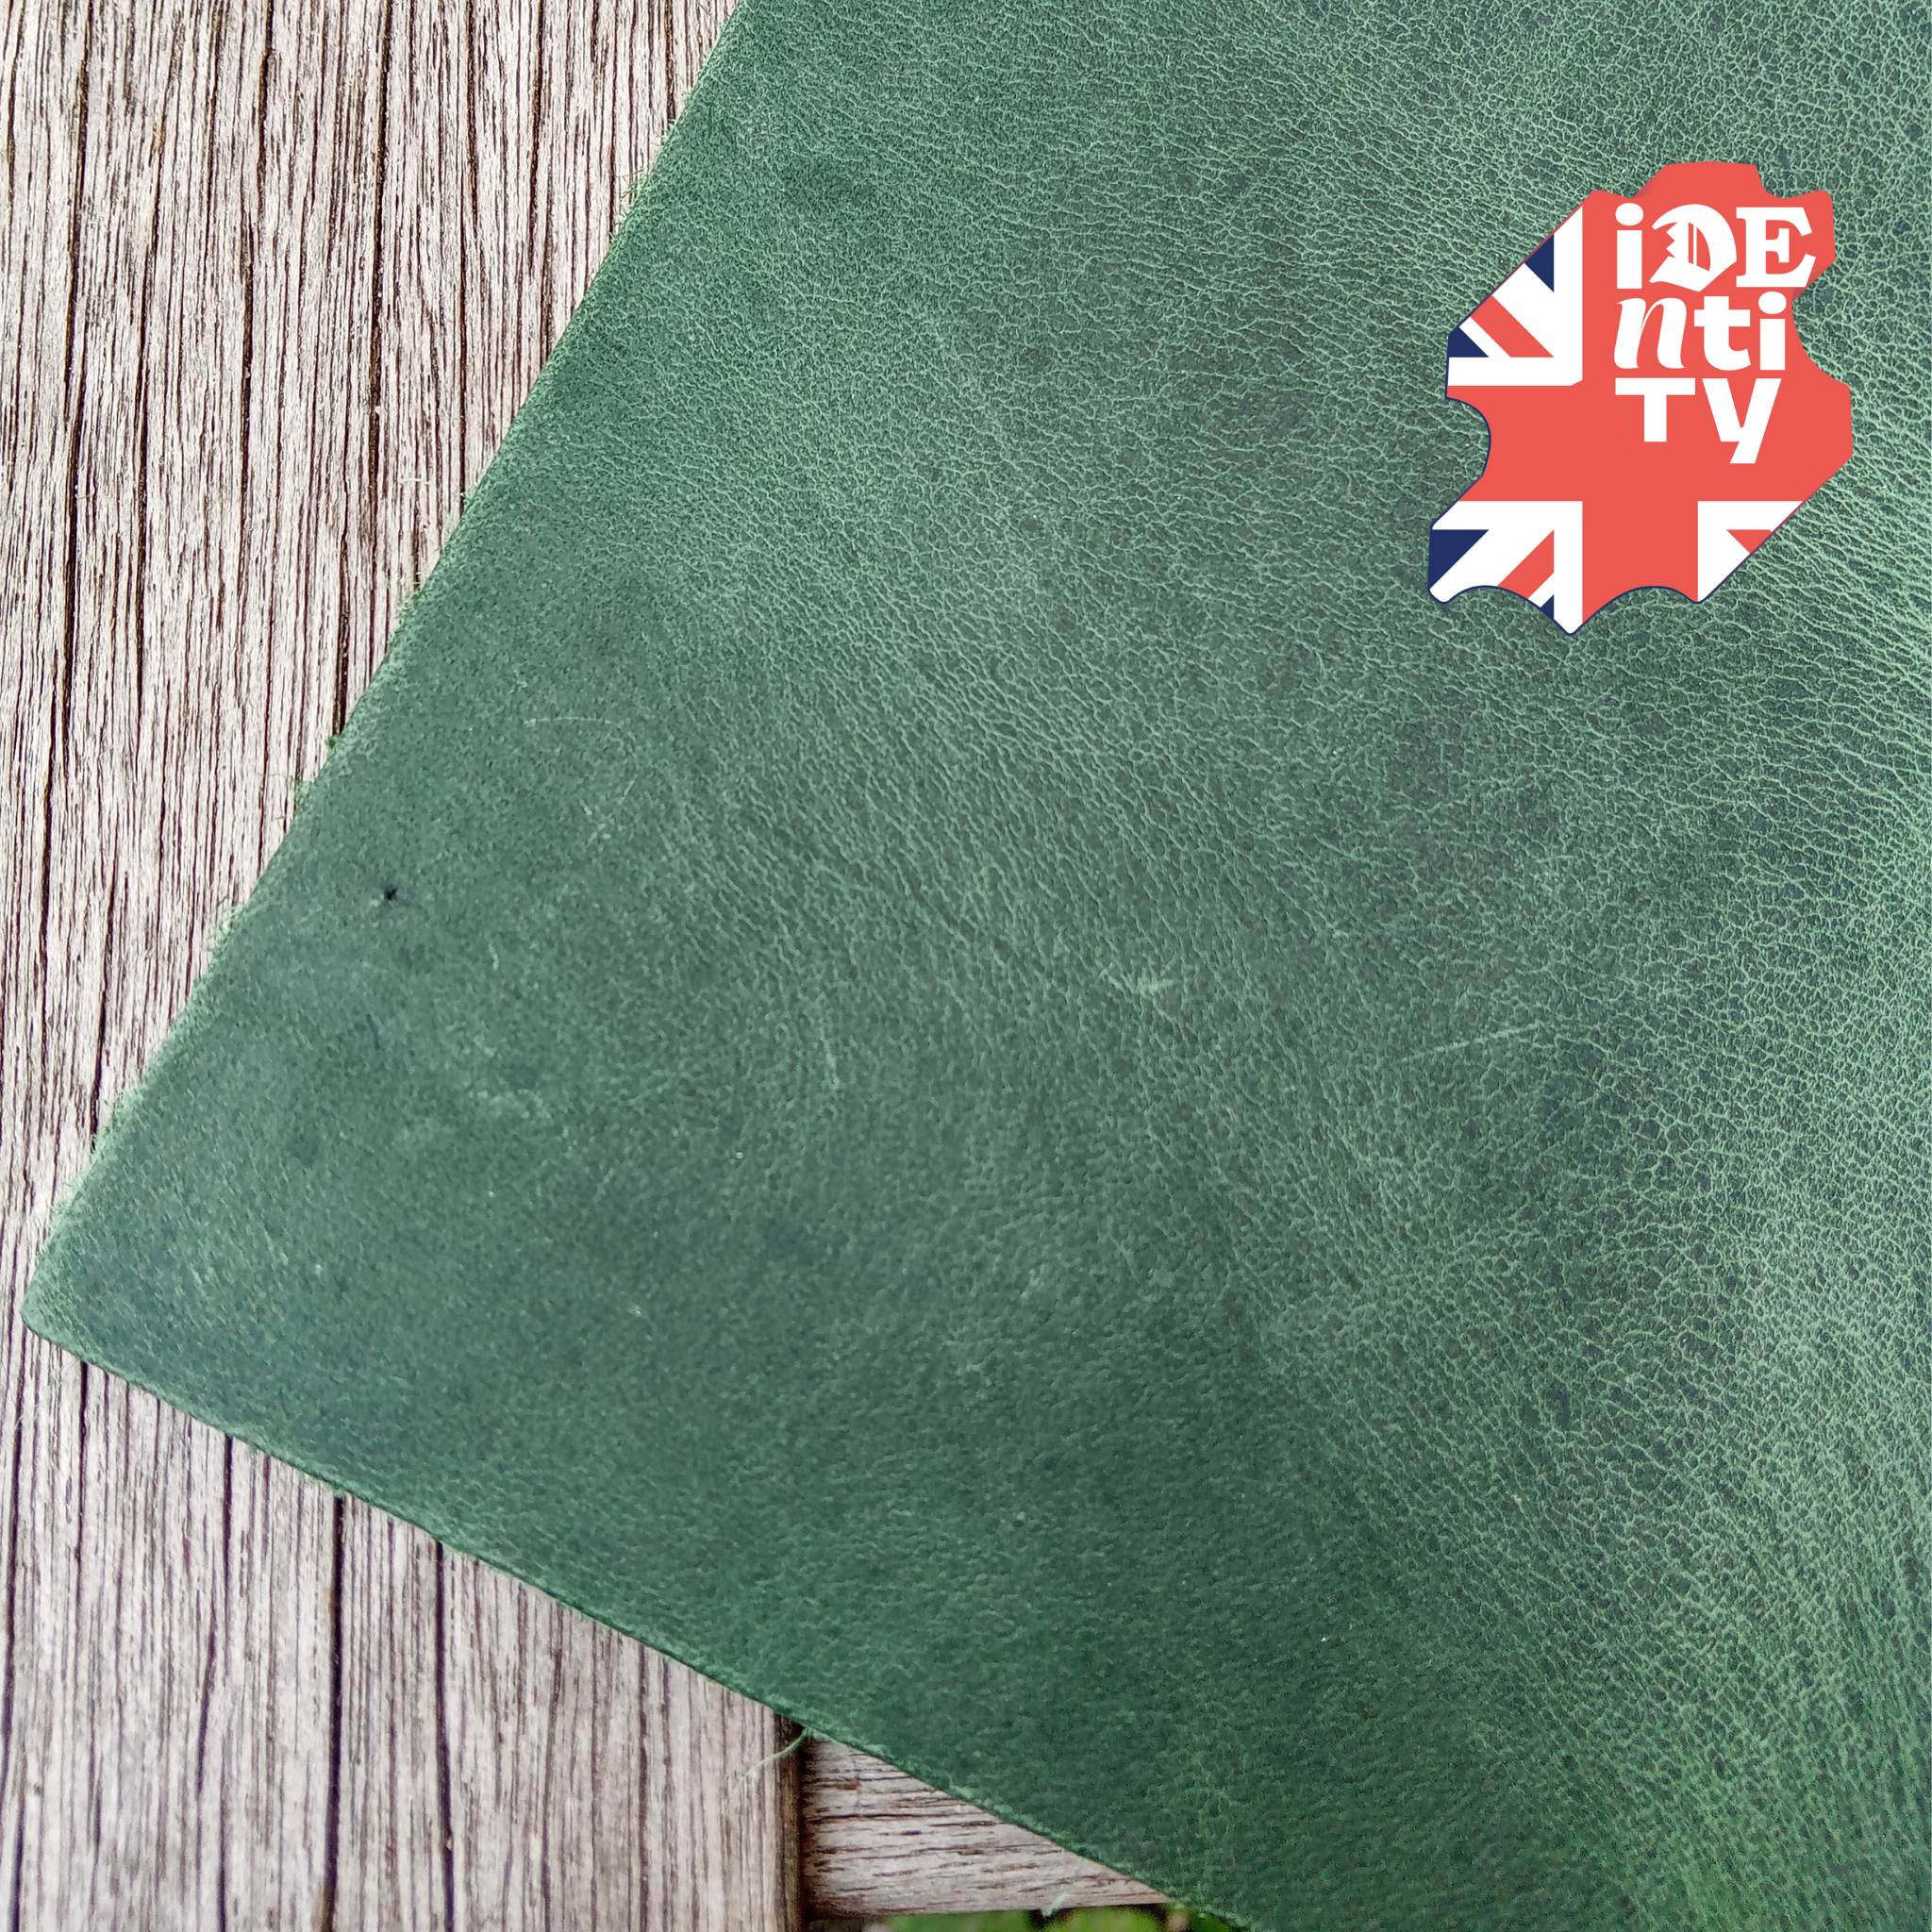 A3 cuts of Heritage UK veg tanned leather in a vintage pull up style, ideal for making knife/tool sheaths, pouches, wrist cuffs, book journals and more.